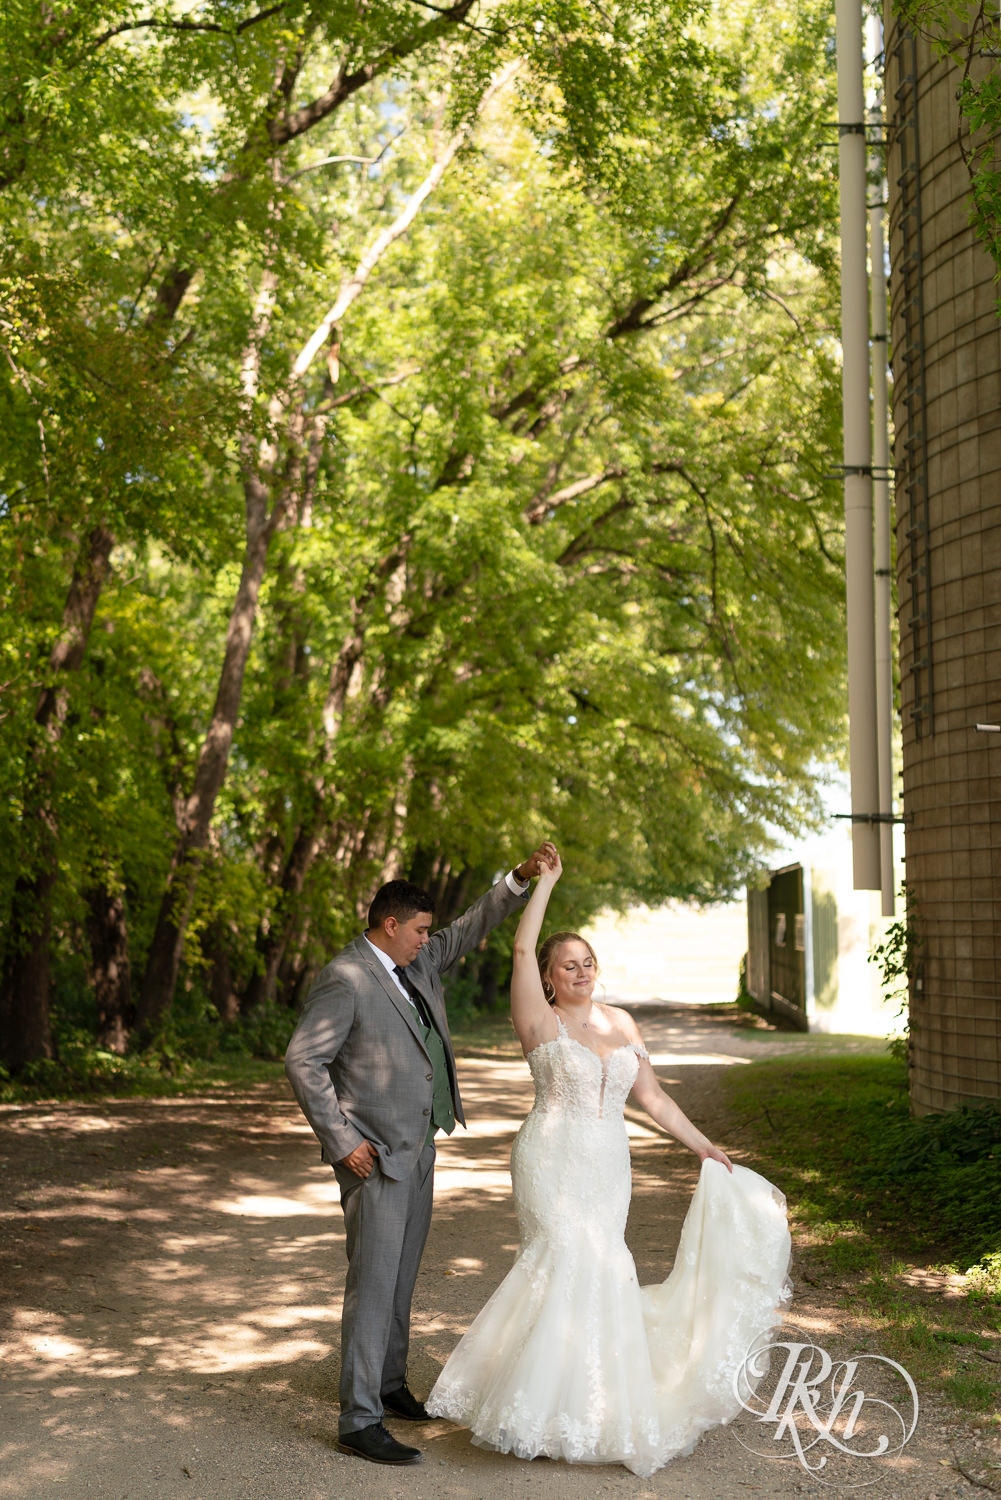 Bride and groom dance on wedding day at Cottage Farmhouse in Glencoe, Minnesota.